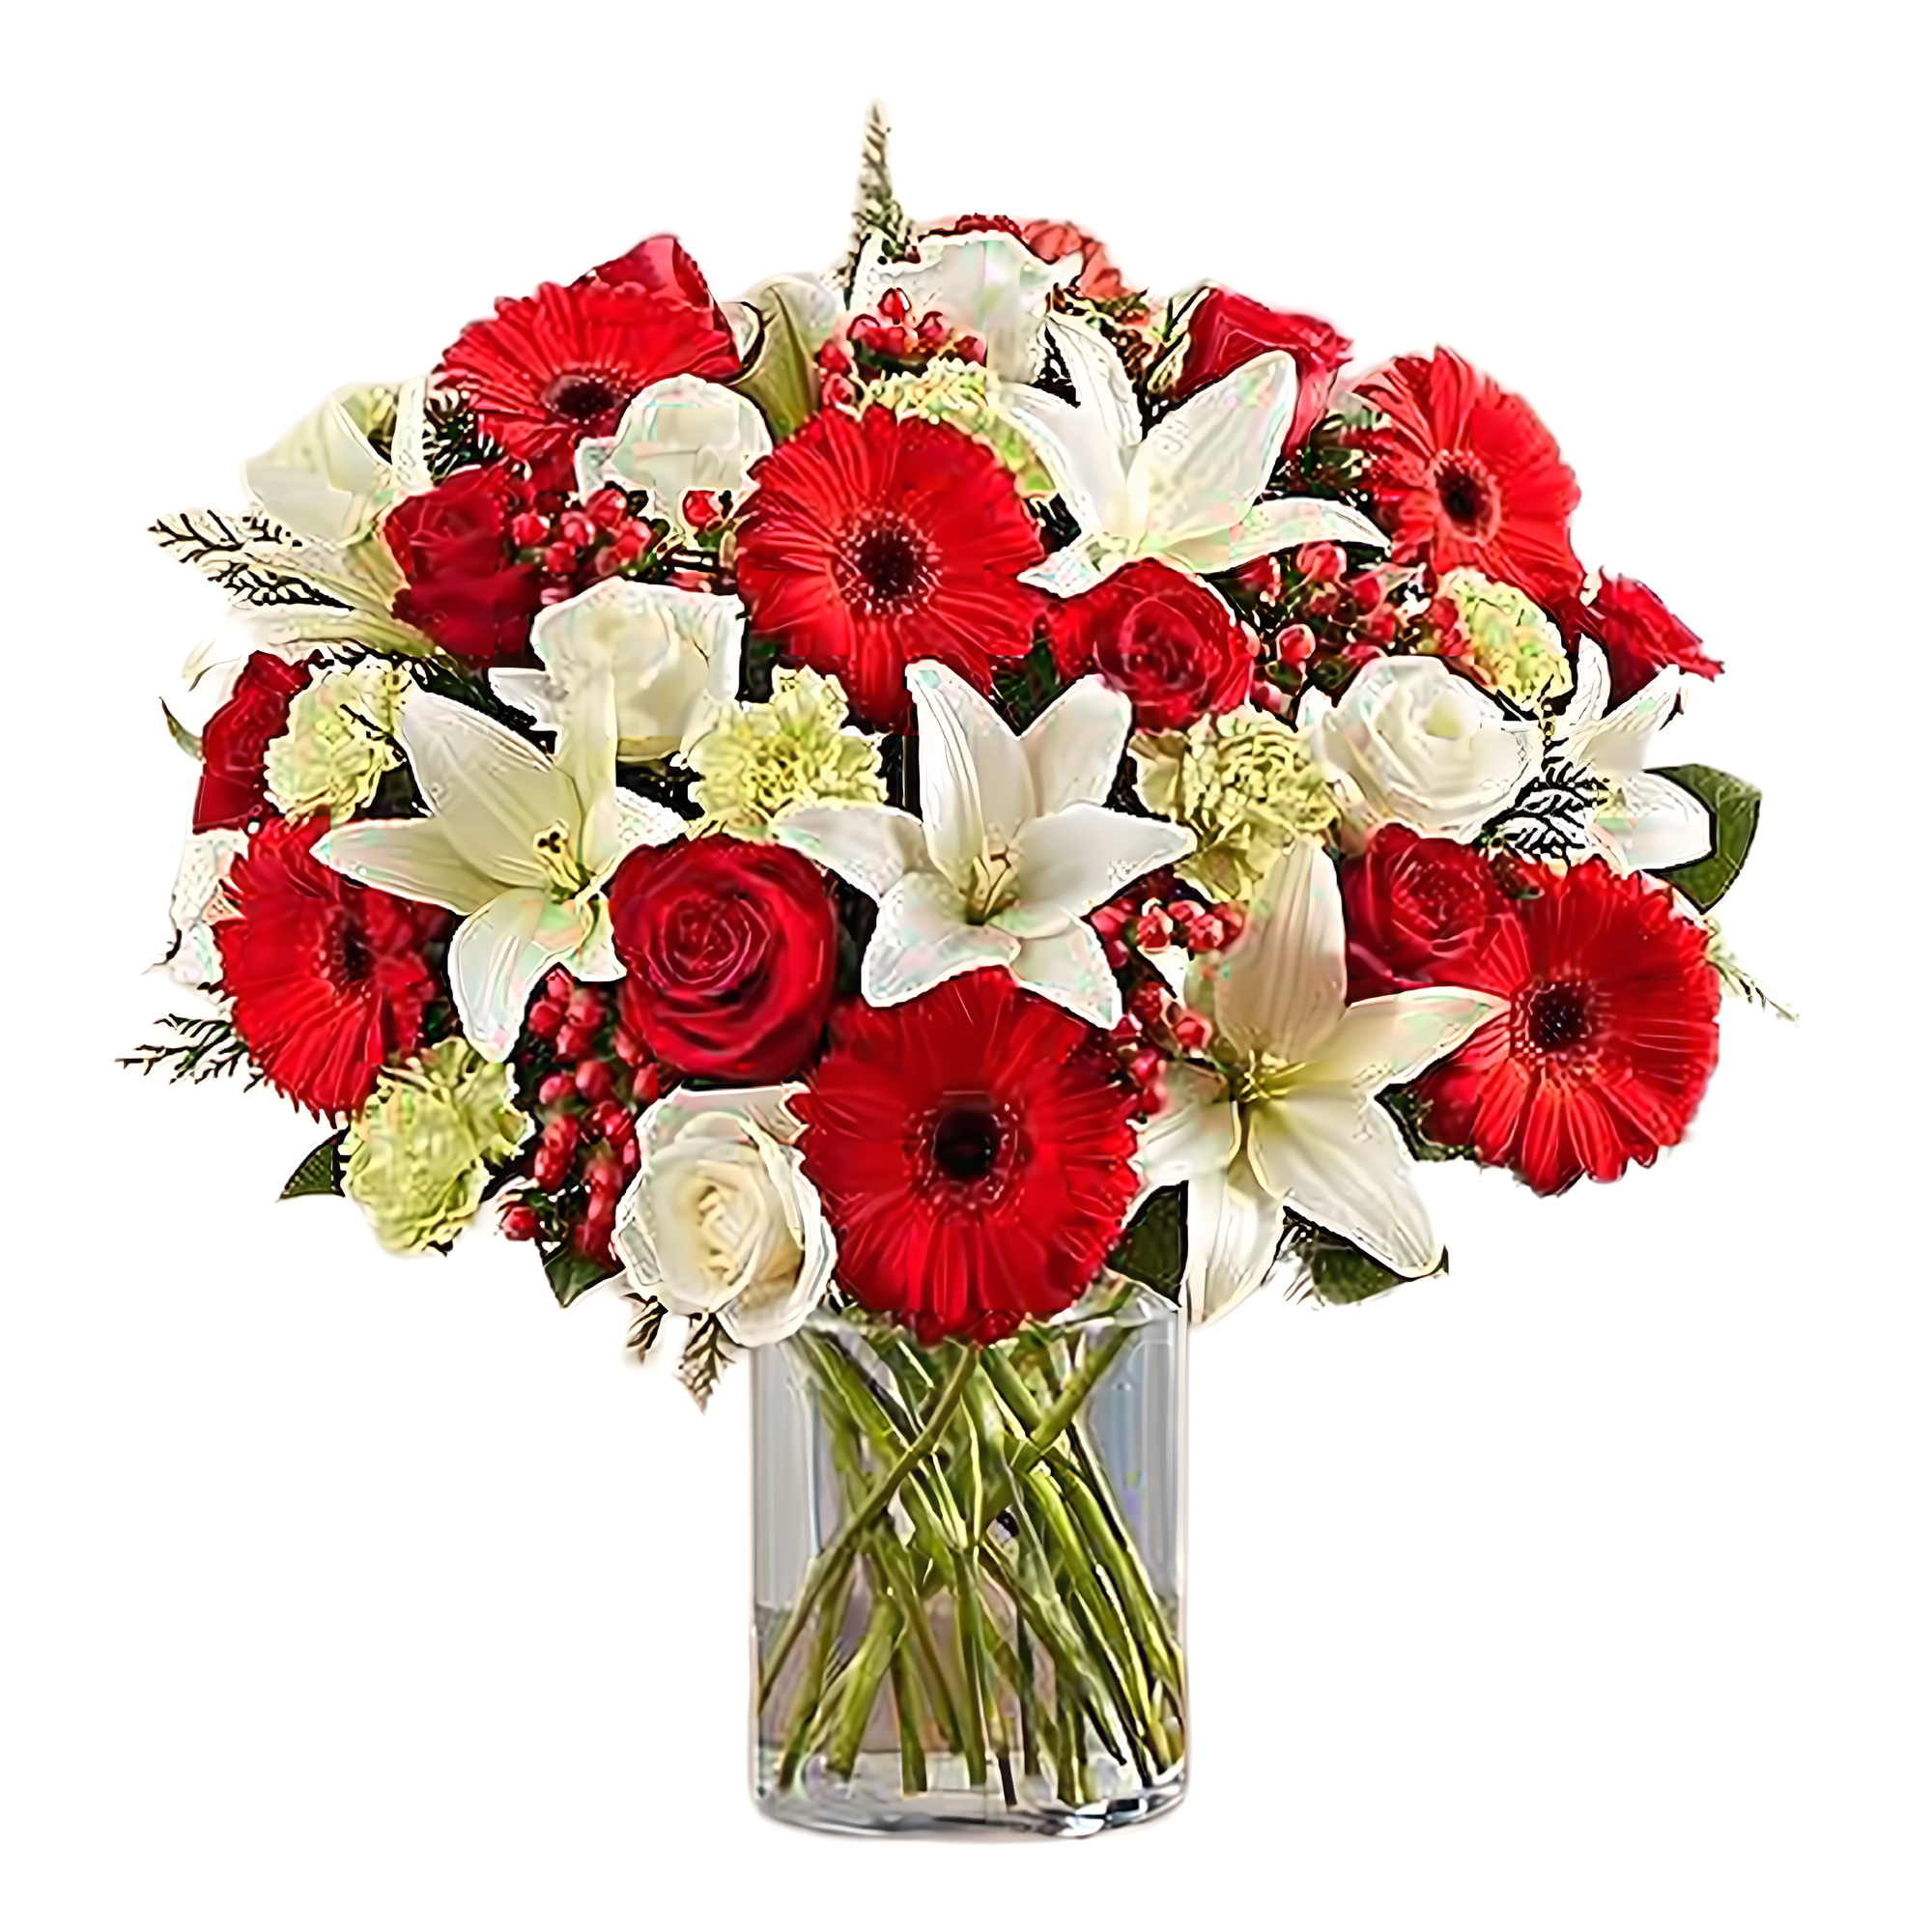 Manhattan Flower Delivery - Colors of the Season - Holiday Collection